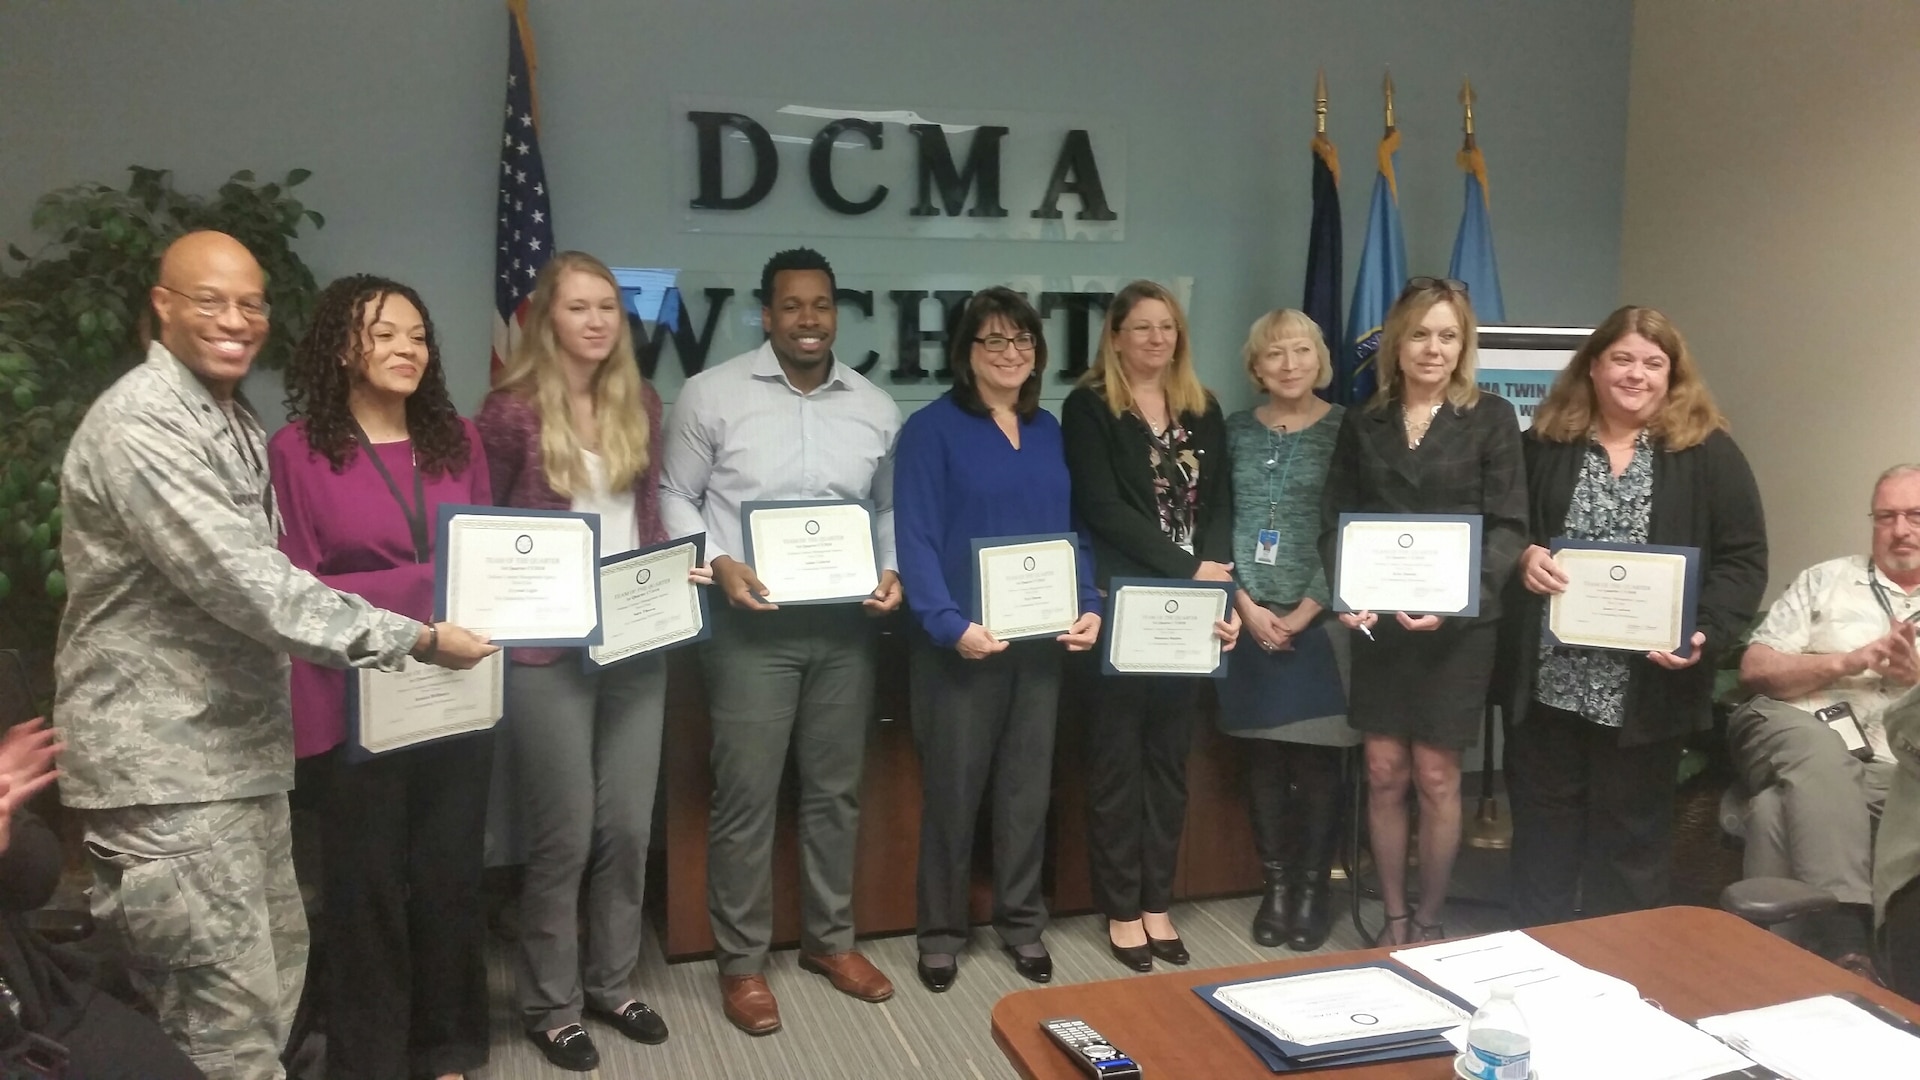 Ten people hold certificates standing in front of a D C M A Wichita sign.